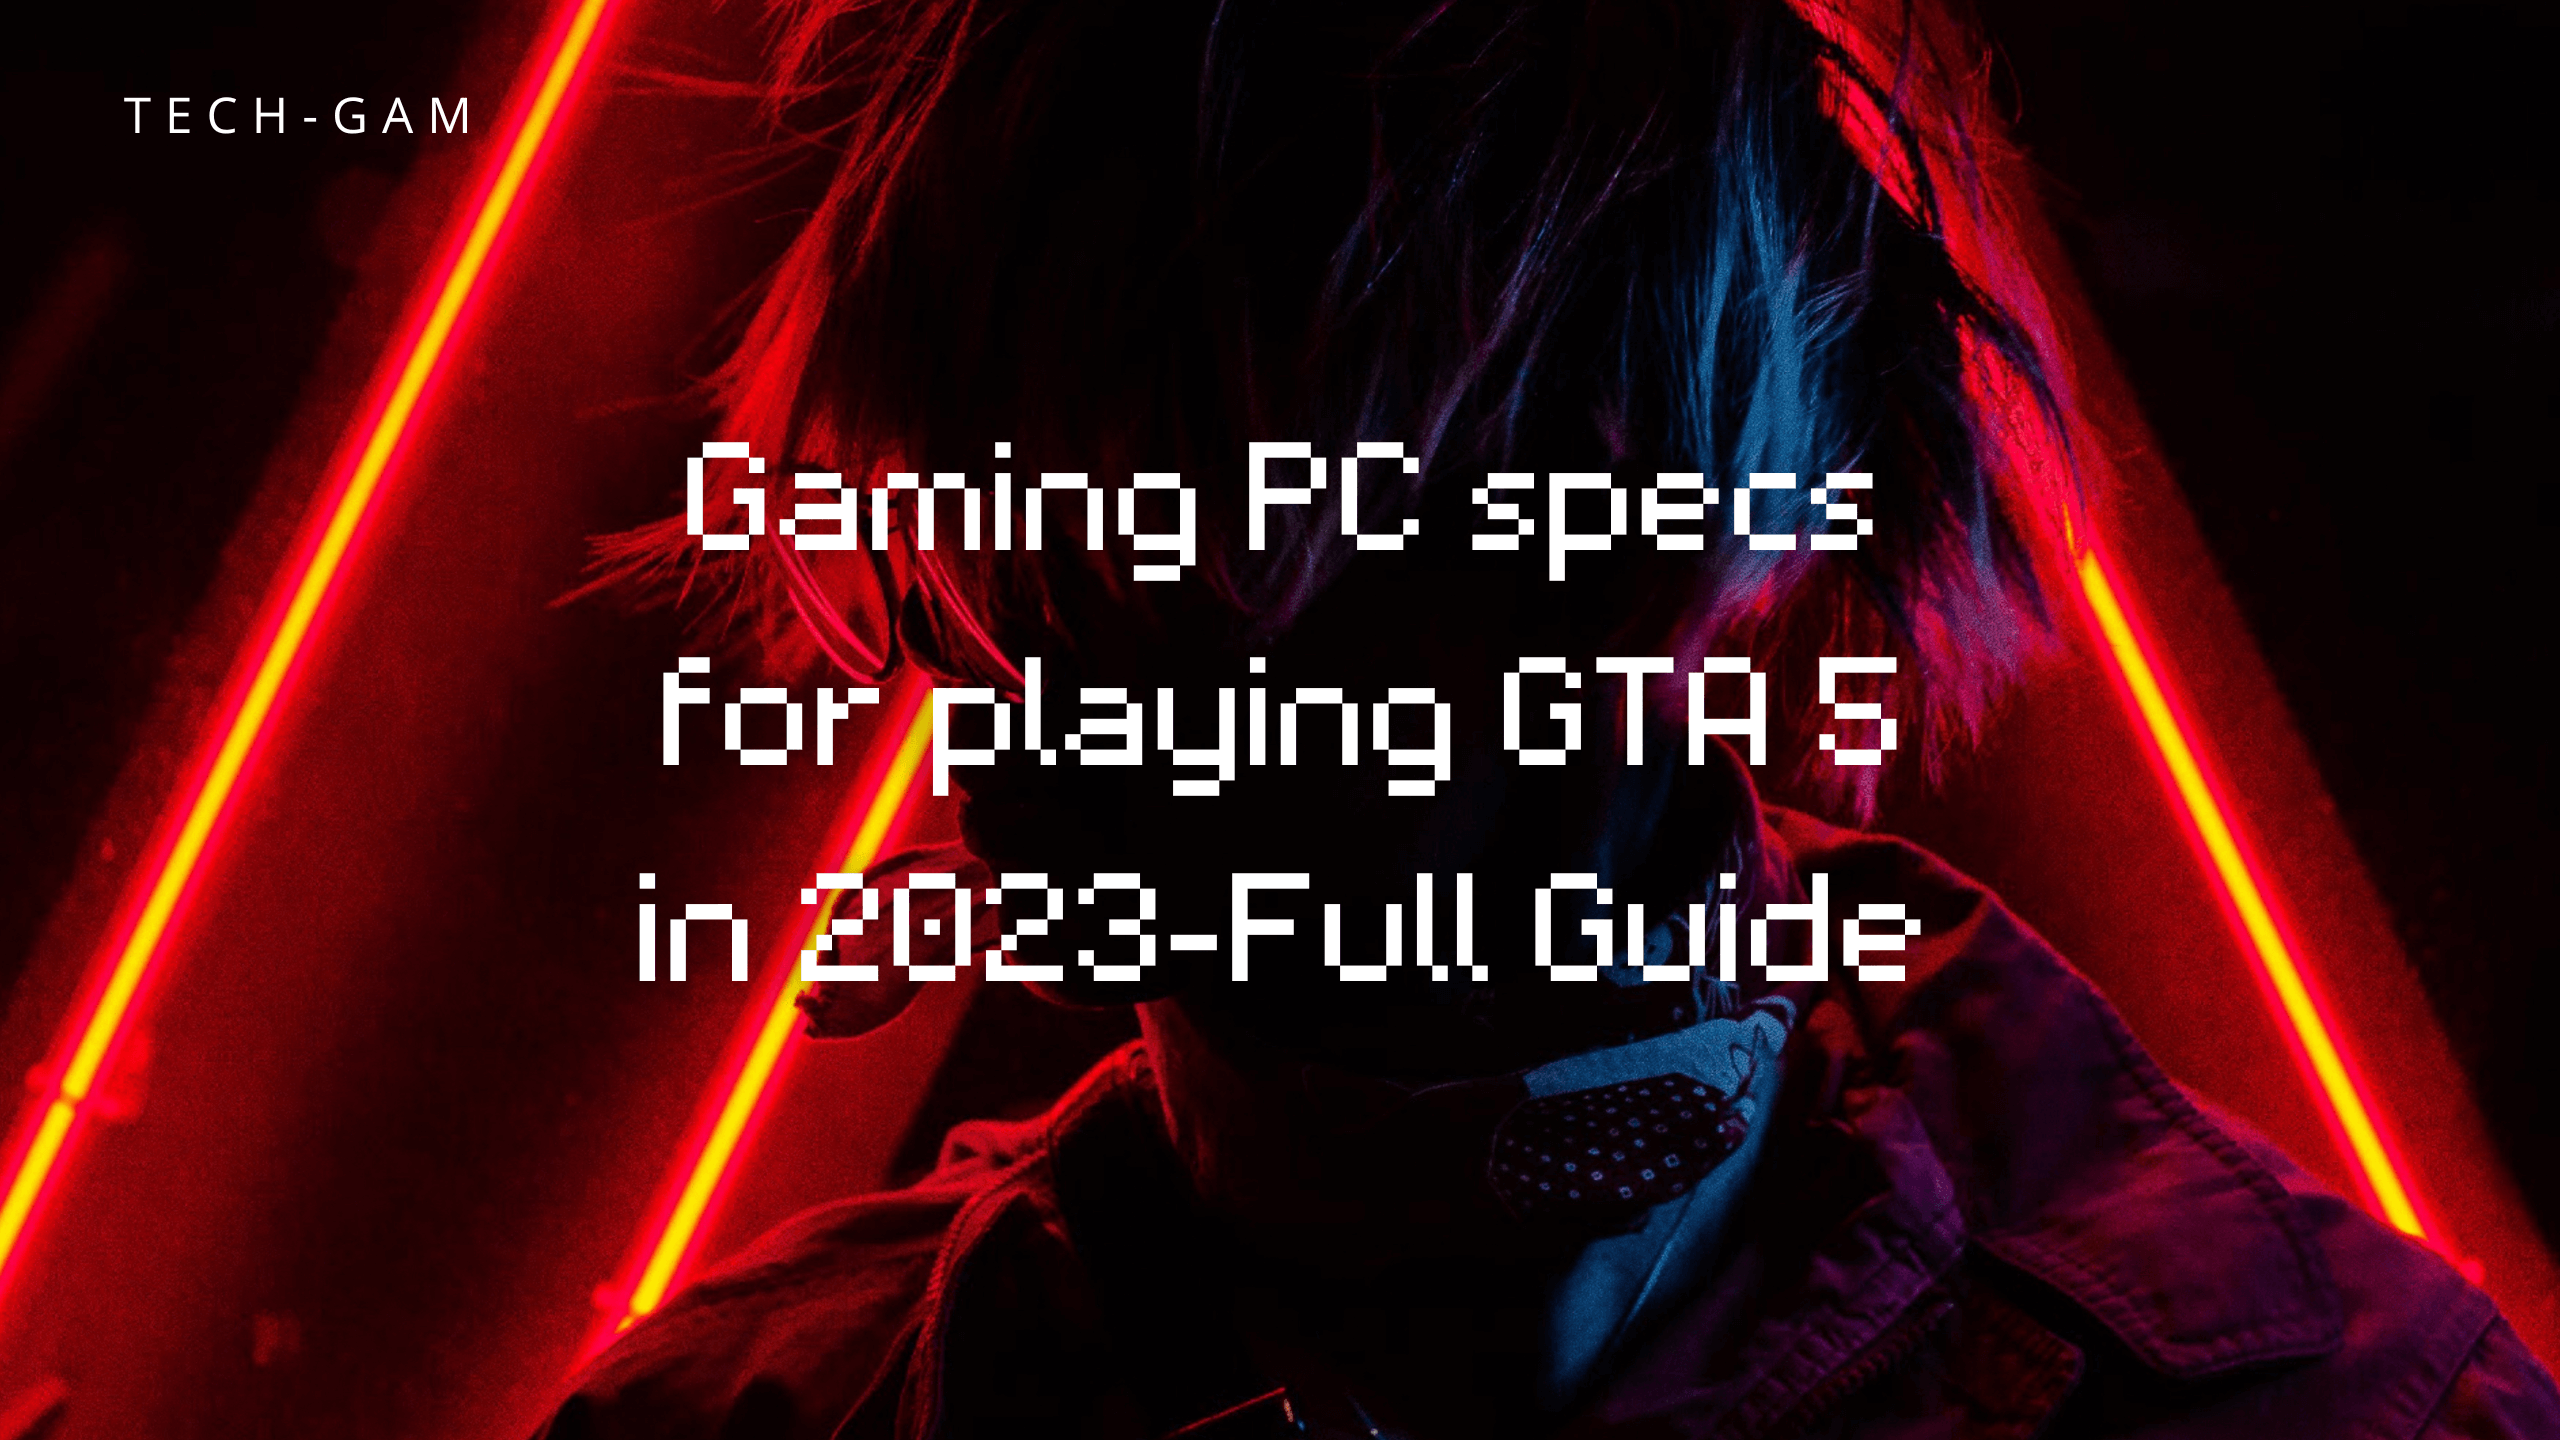 Gaming PC specs for playing GTA 5 in 2023-Full Guide